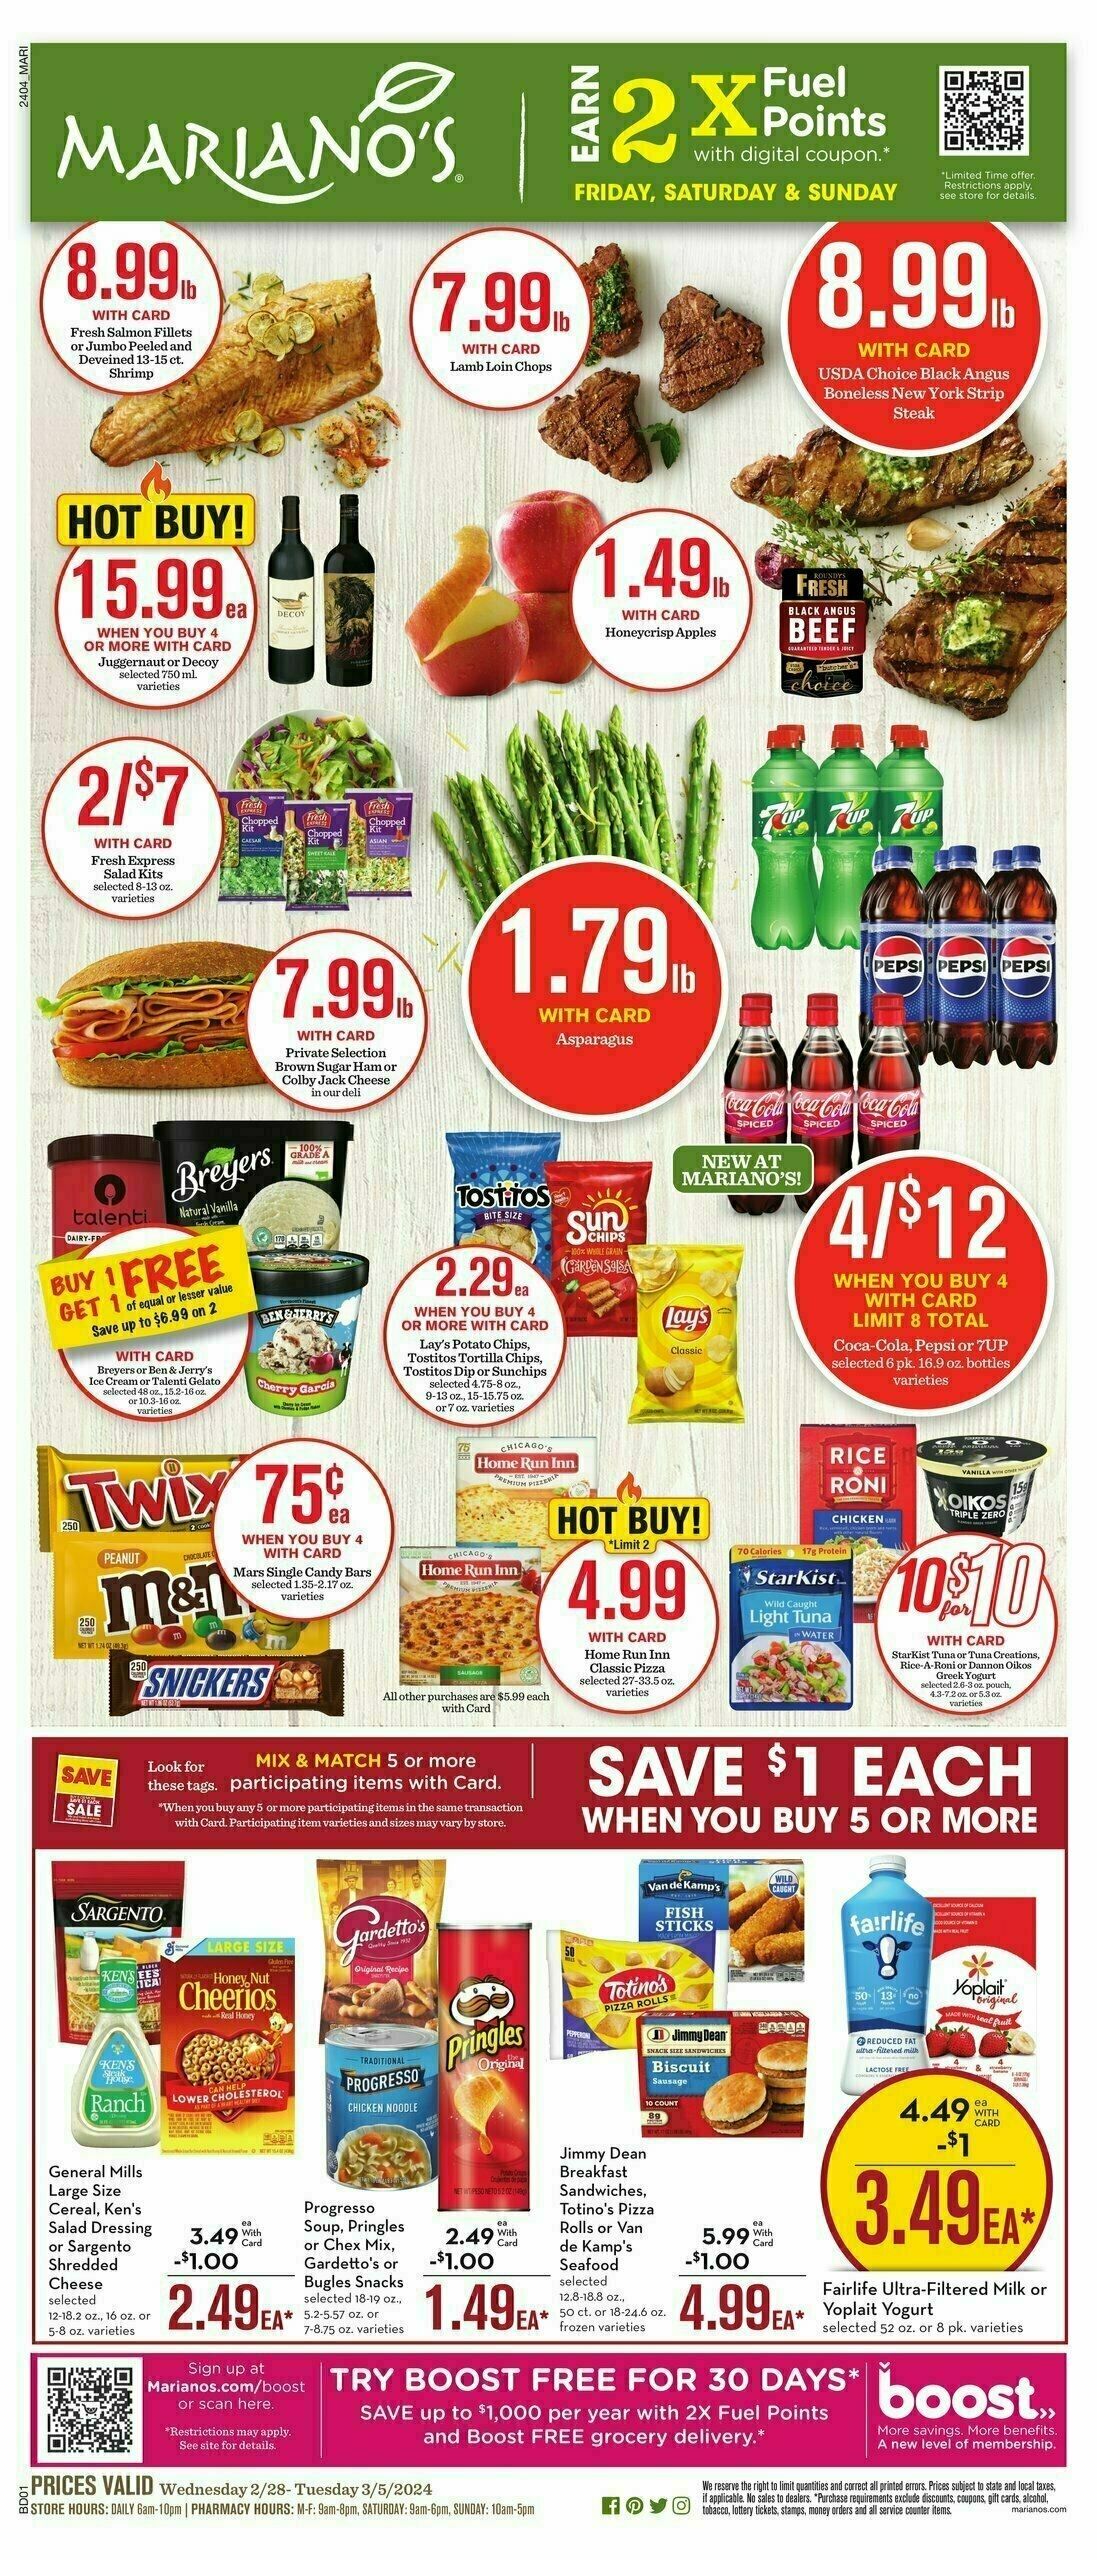 Mariano's Weekly Ad from February 28